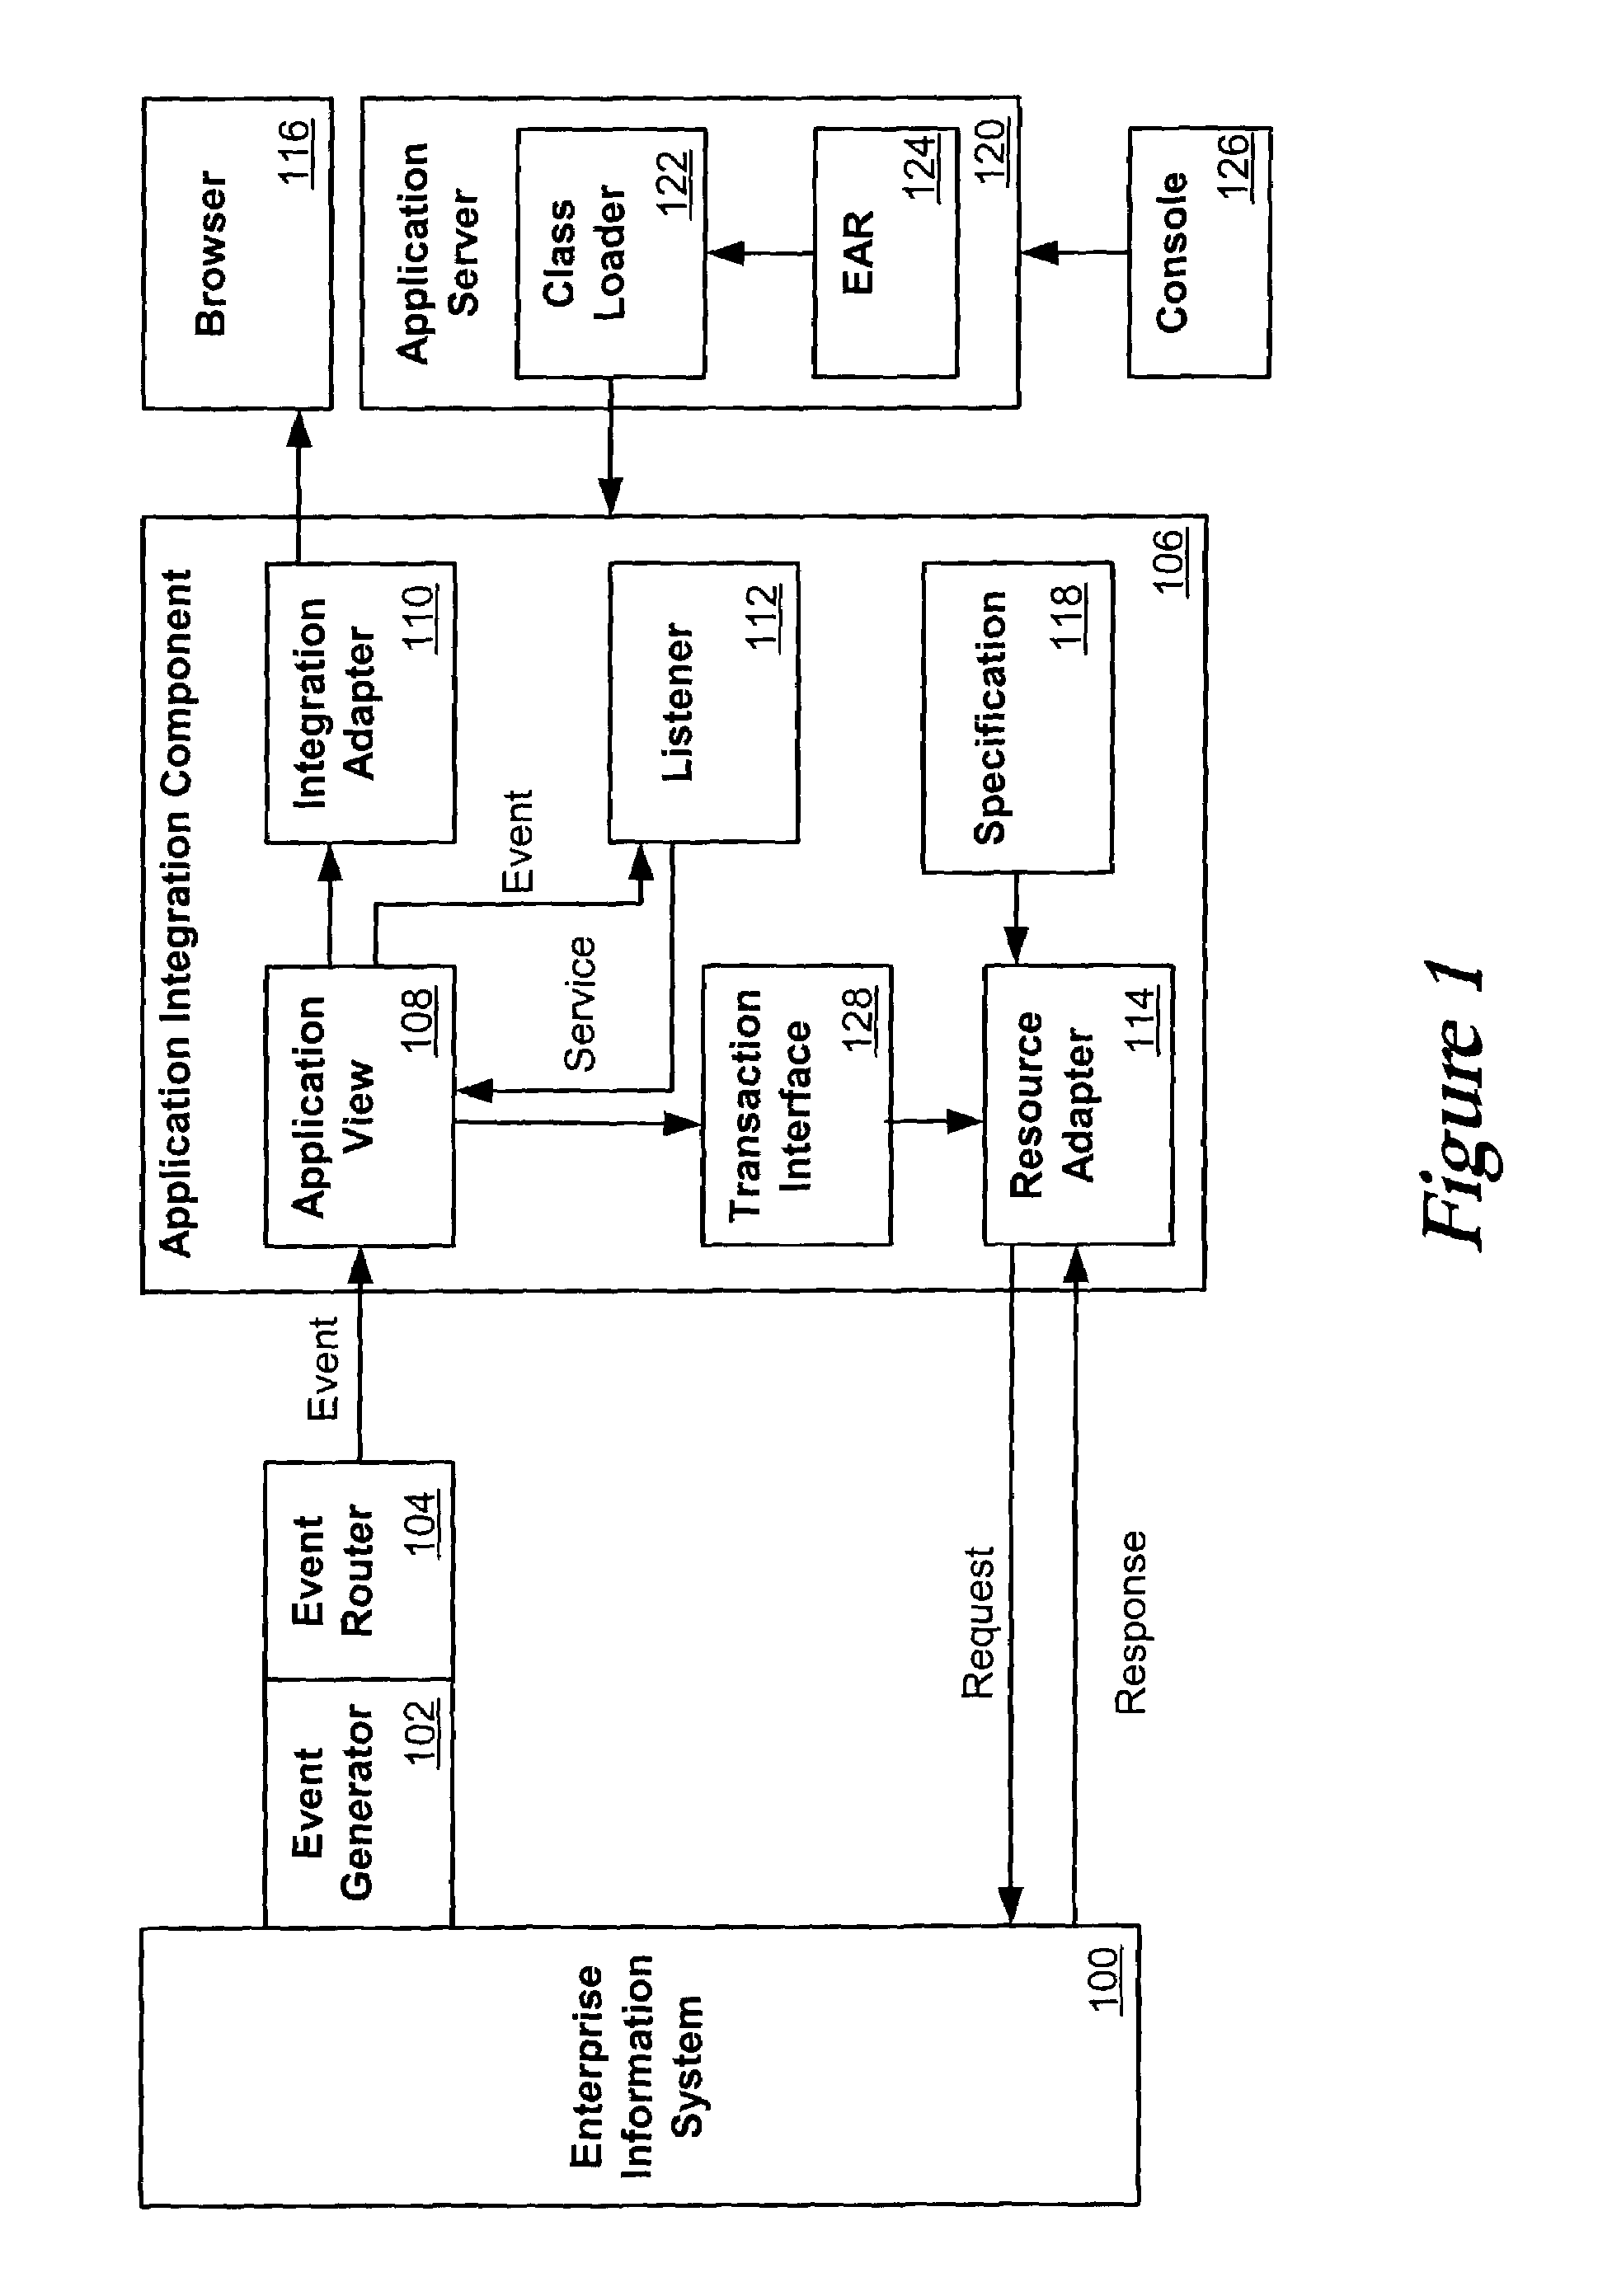 System and method for enterprise application interactions